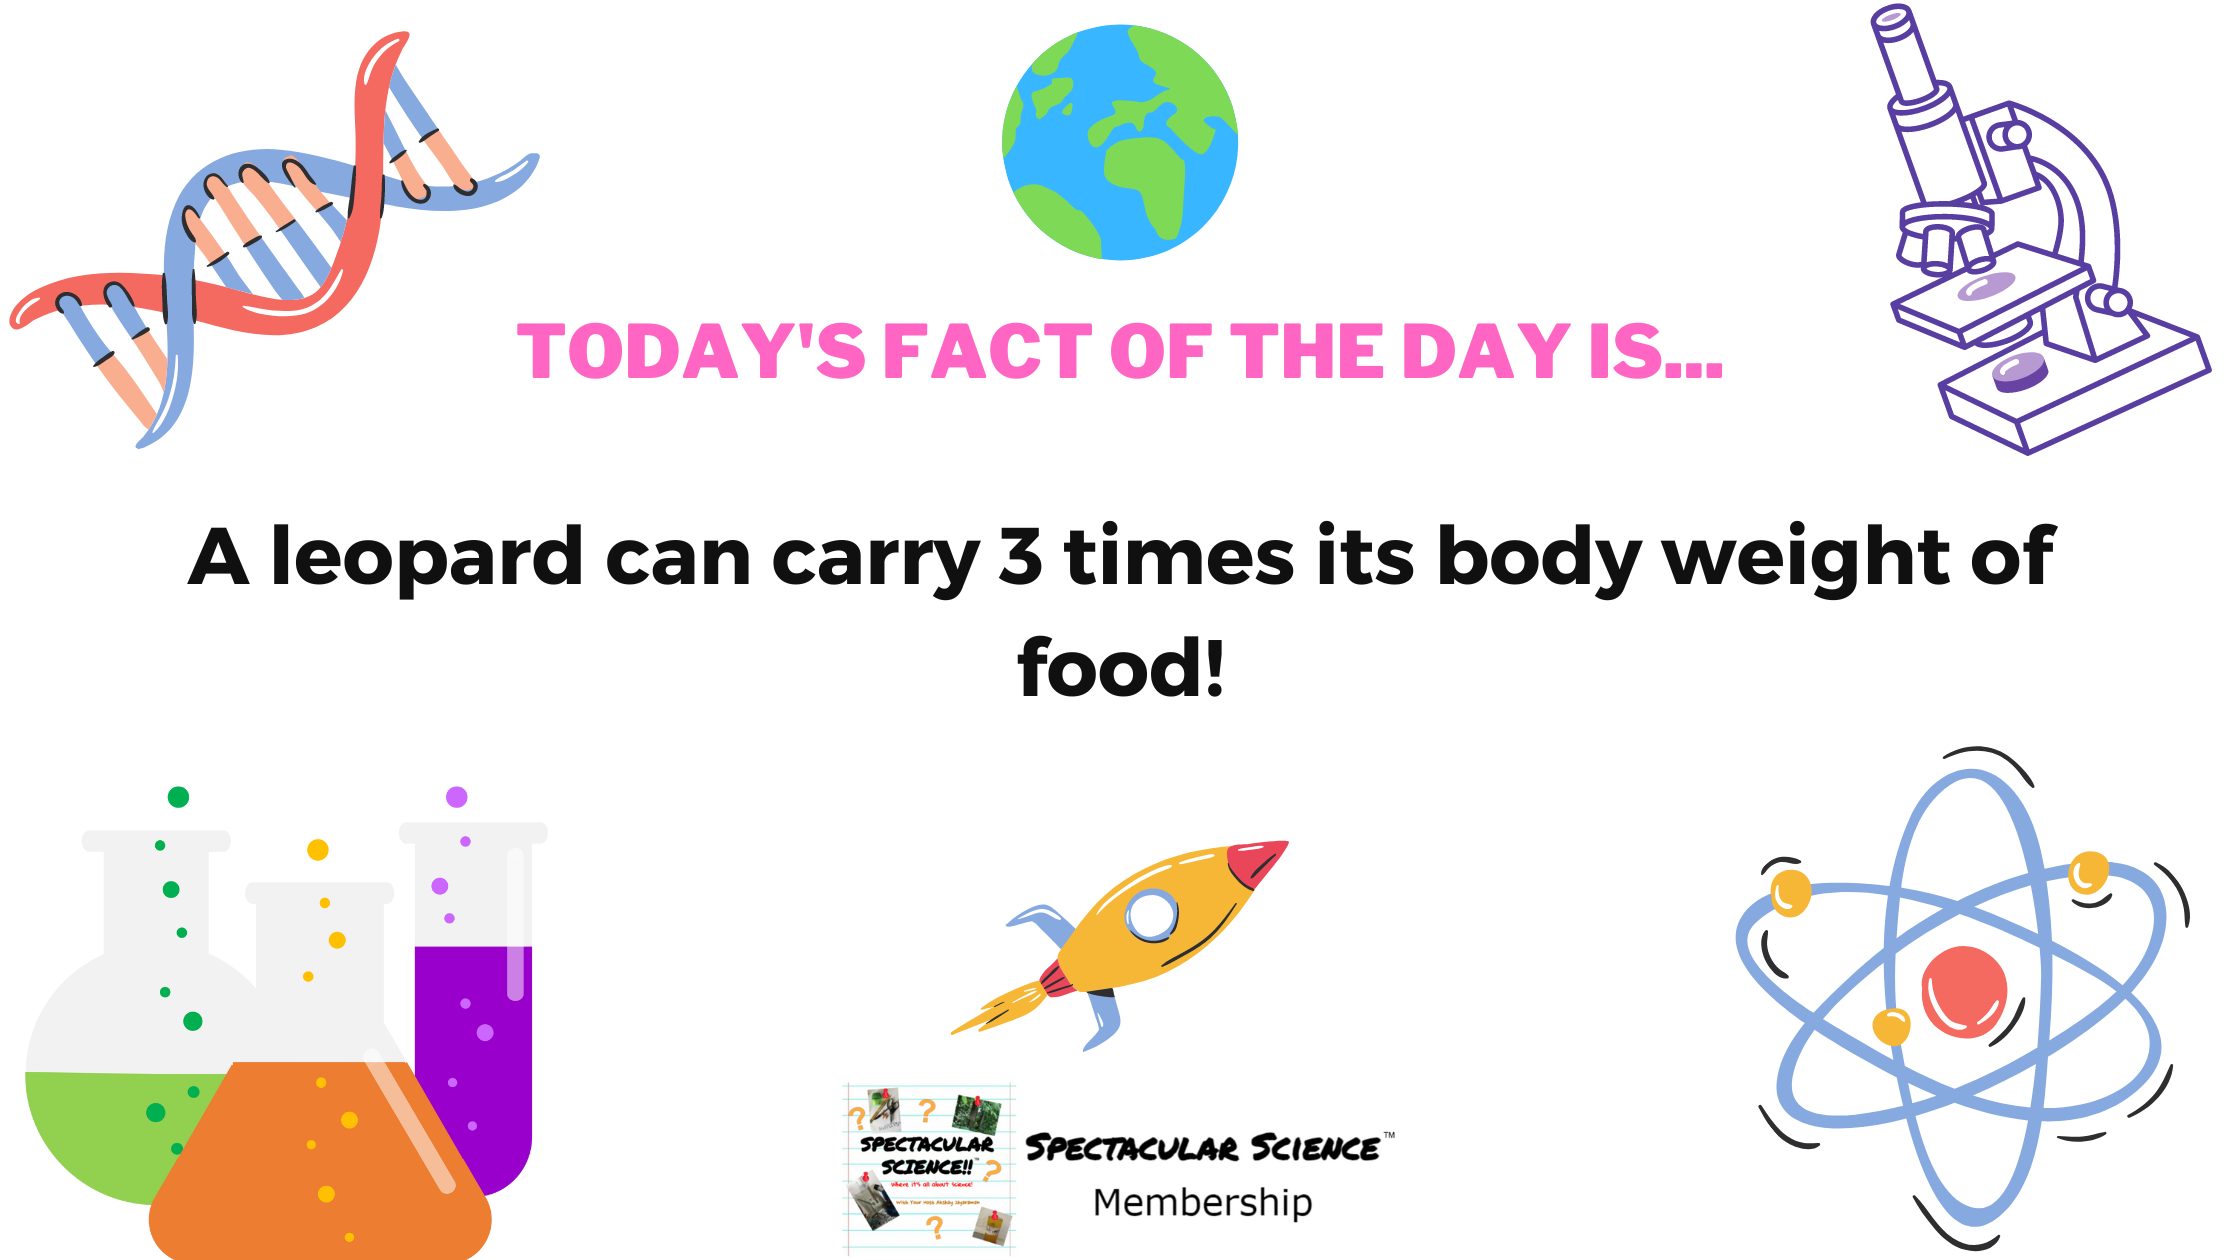 Fact of the Day Image October 16th